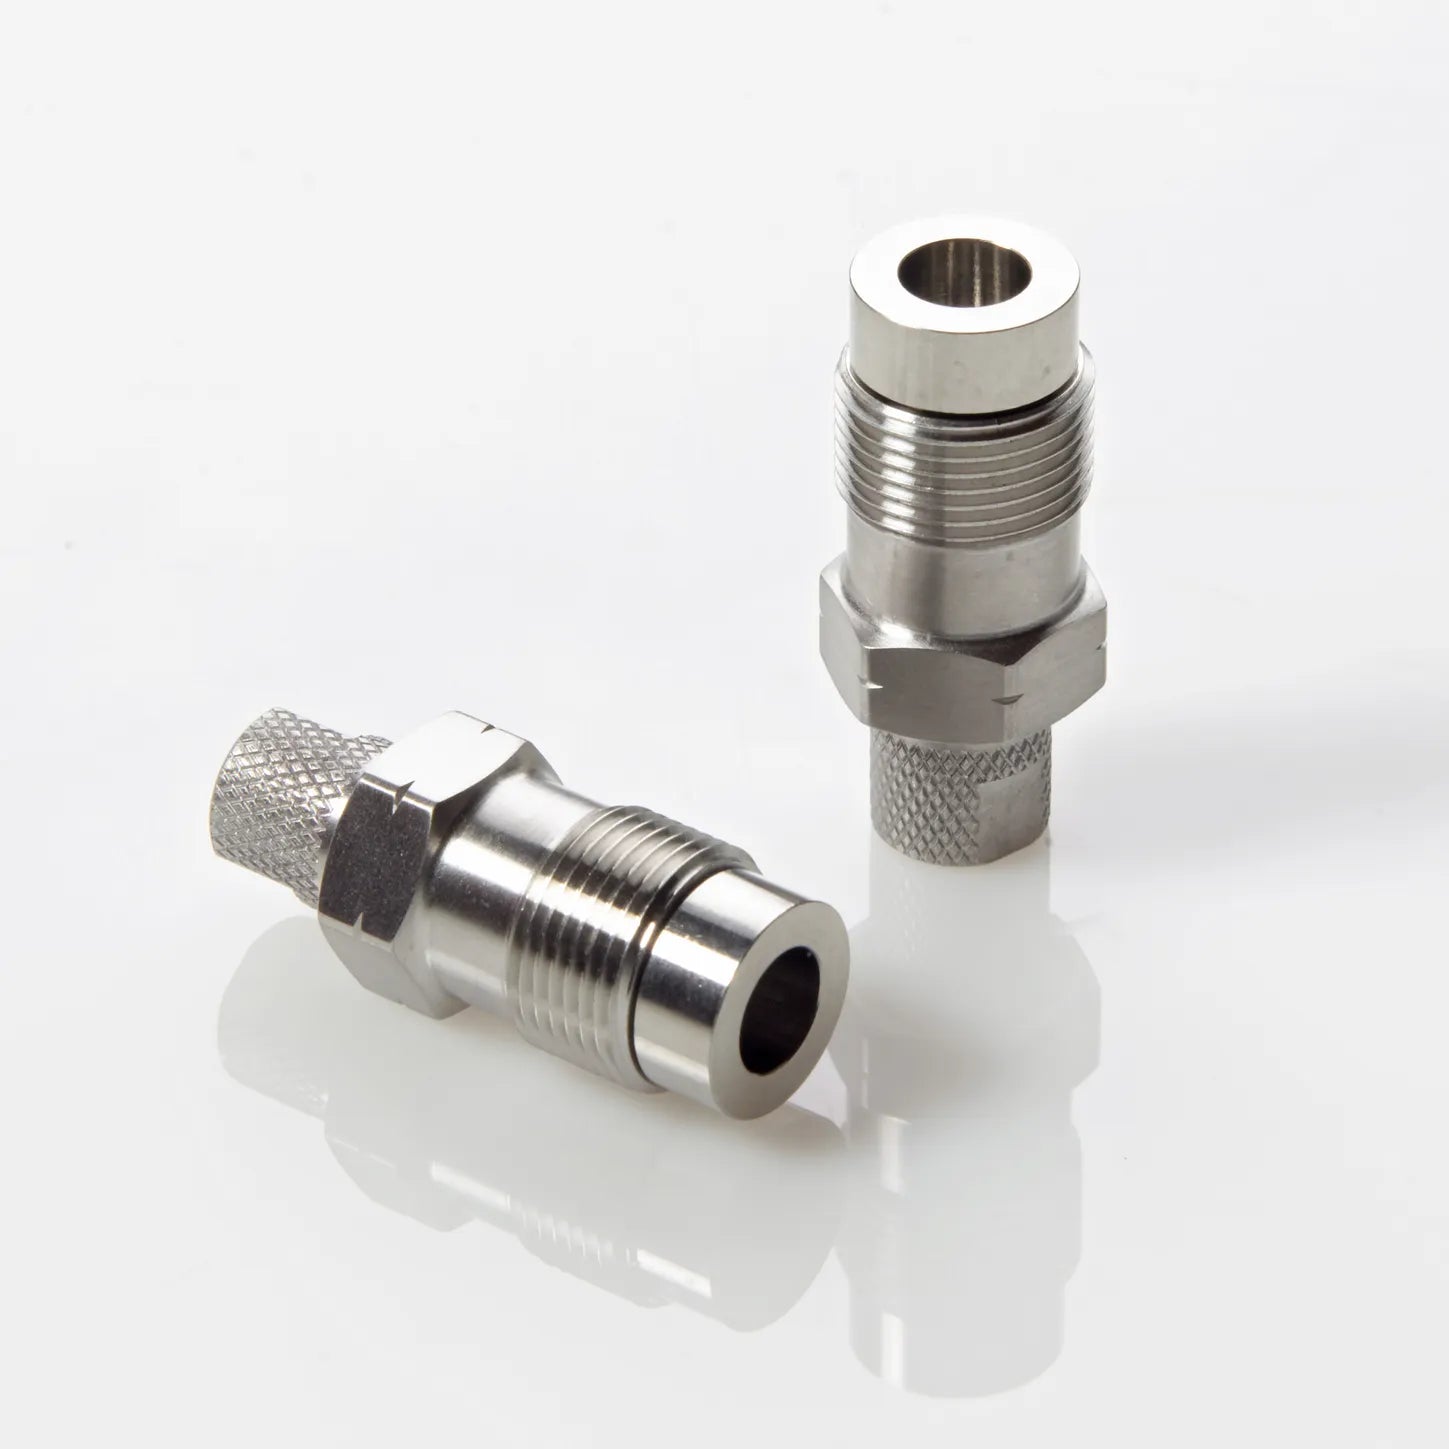 Cartridge Check Valve Housing, 2/pk, Comparable to Waters # 700001108